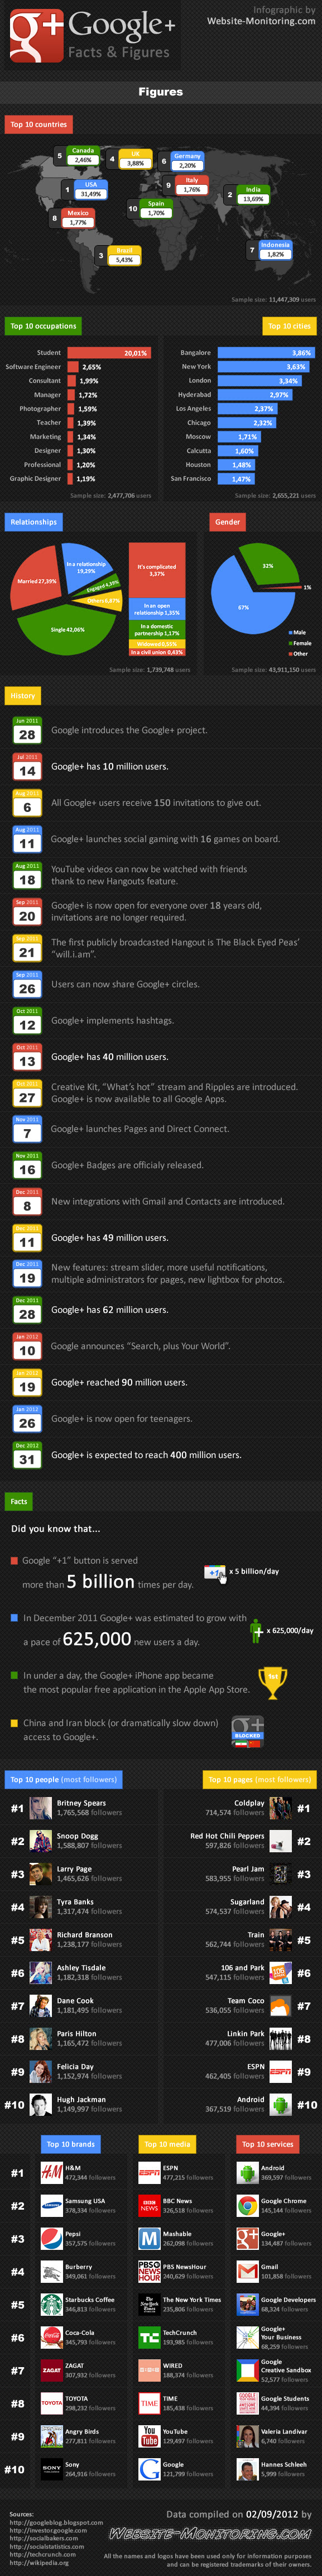 Google+ Facts, Figures and Statistics Infographic